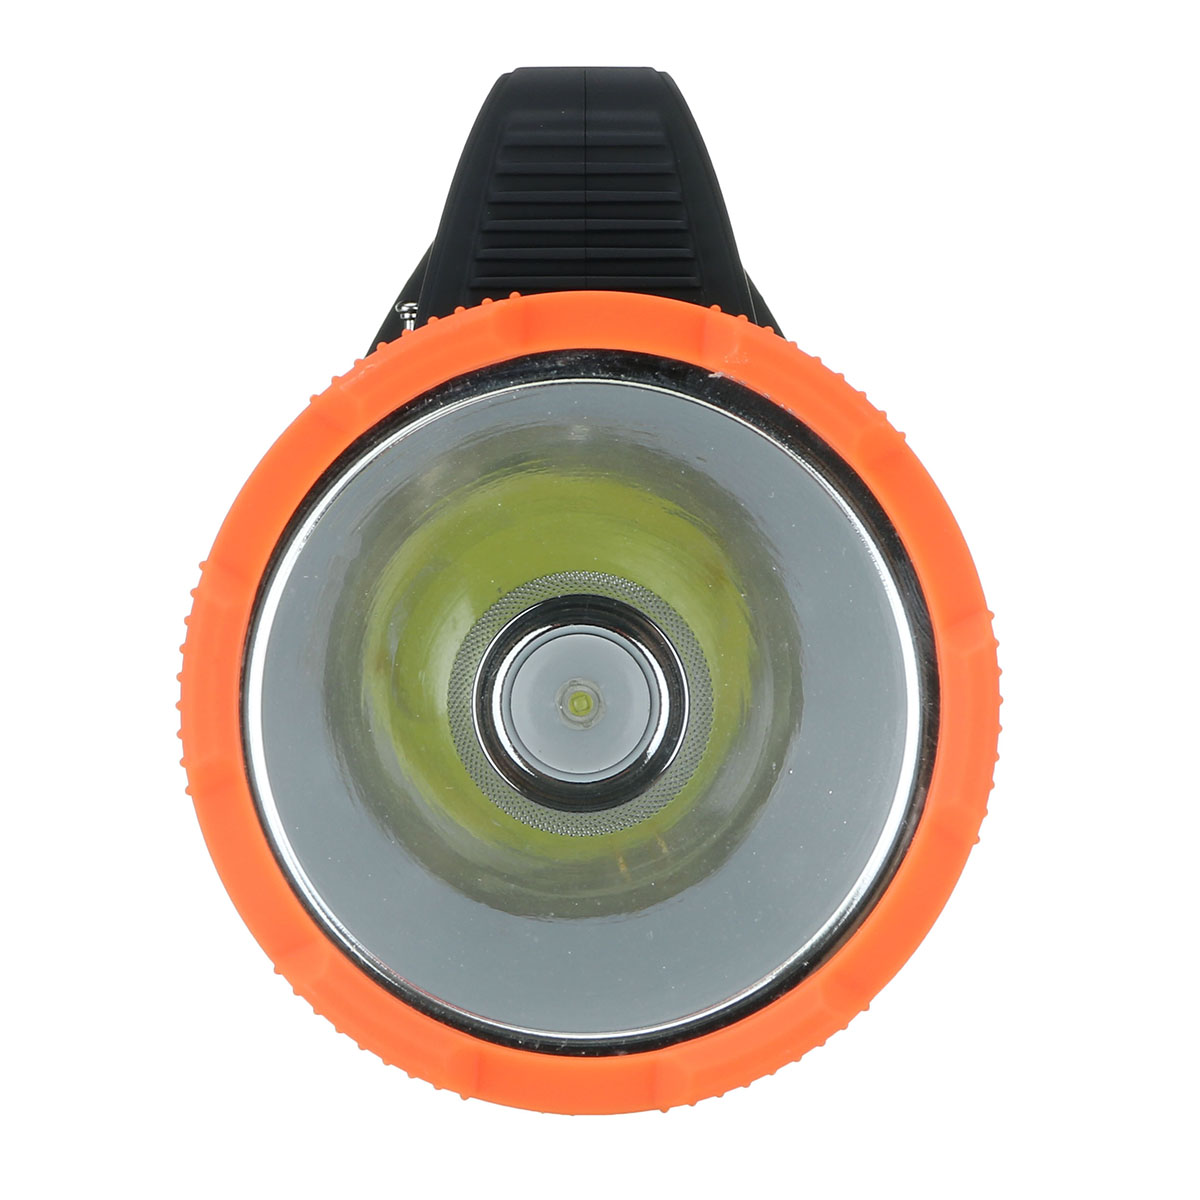 3-Modes-Powerful-Camping-Lamp-With-COB-Side-Light-Outdoor-Portable-Spotlight-Built-in-FM-Bluetooth-F-1806632-2